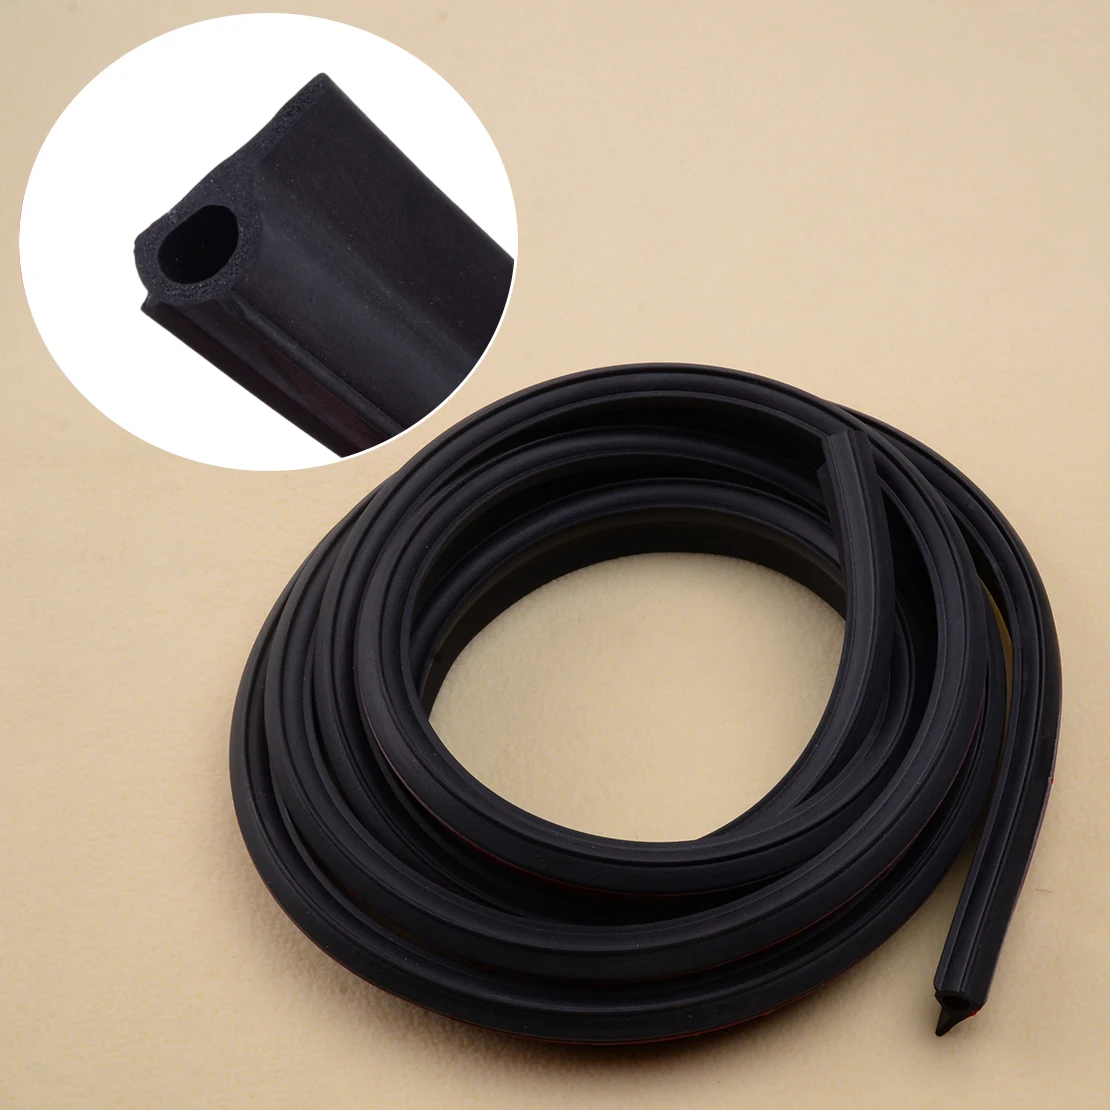 

3m Rubber Black Tail Gate Tailgate Dust Protection Seal Kit Fit For Trucks Pick-ups Bus Boat